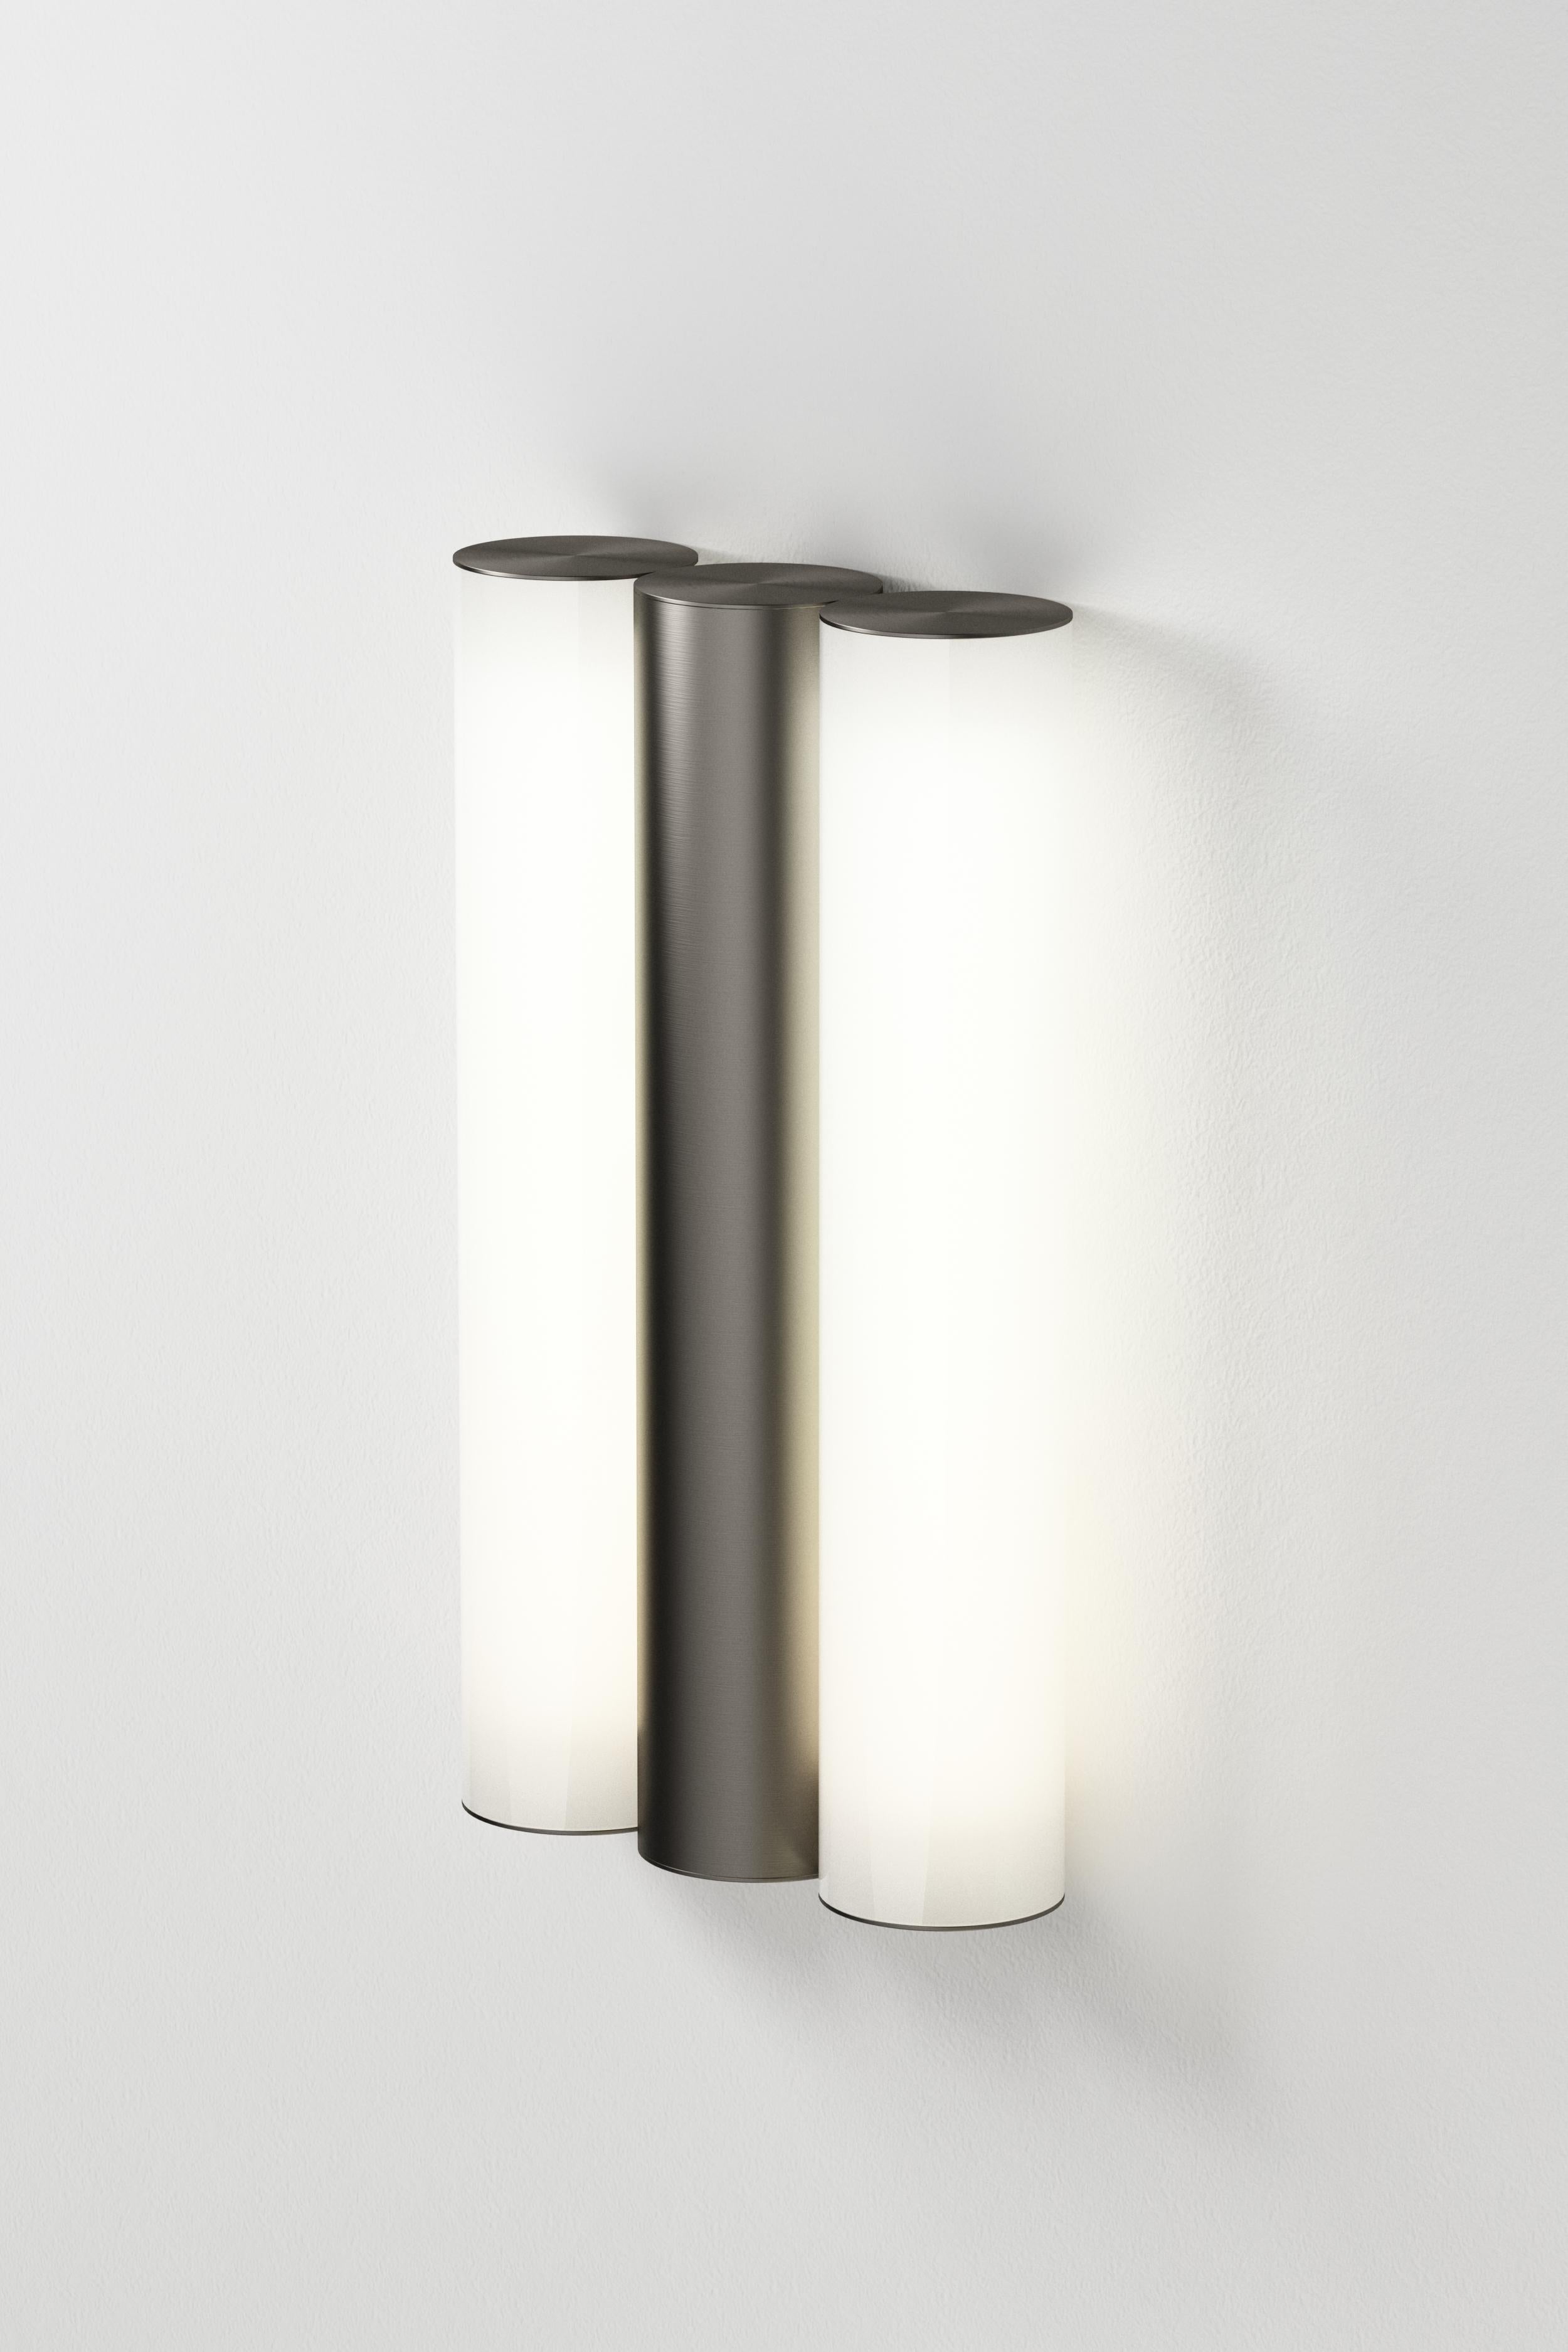 IP Gamma Satin Graphite Wall Light by Sylvain Willenz
Dimensions: D15.2 x W5 X H28.4 cm
Materials: Solid brass, Satin Graphite
Others finishes are available.

All our lamps can be wired according to each country. If sold to the USA it will be